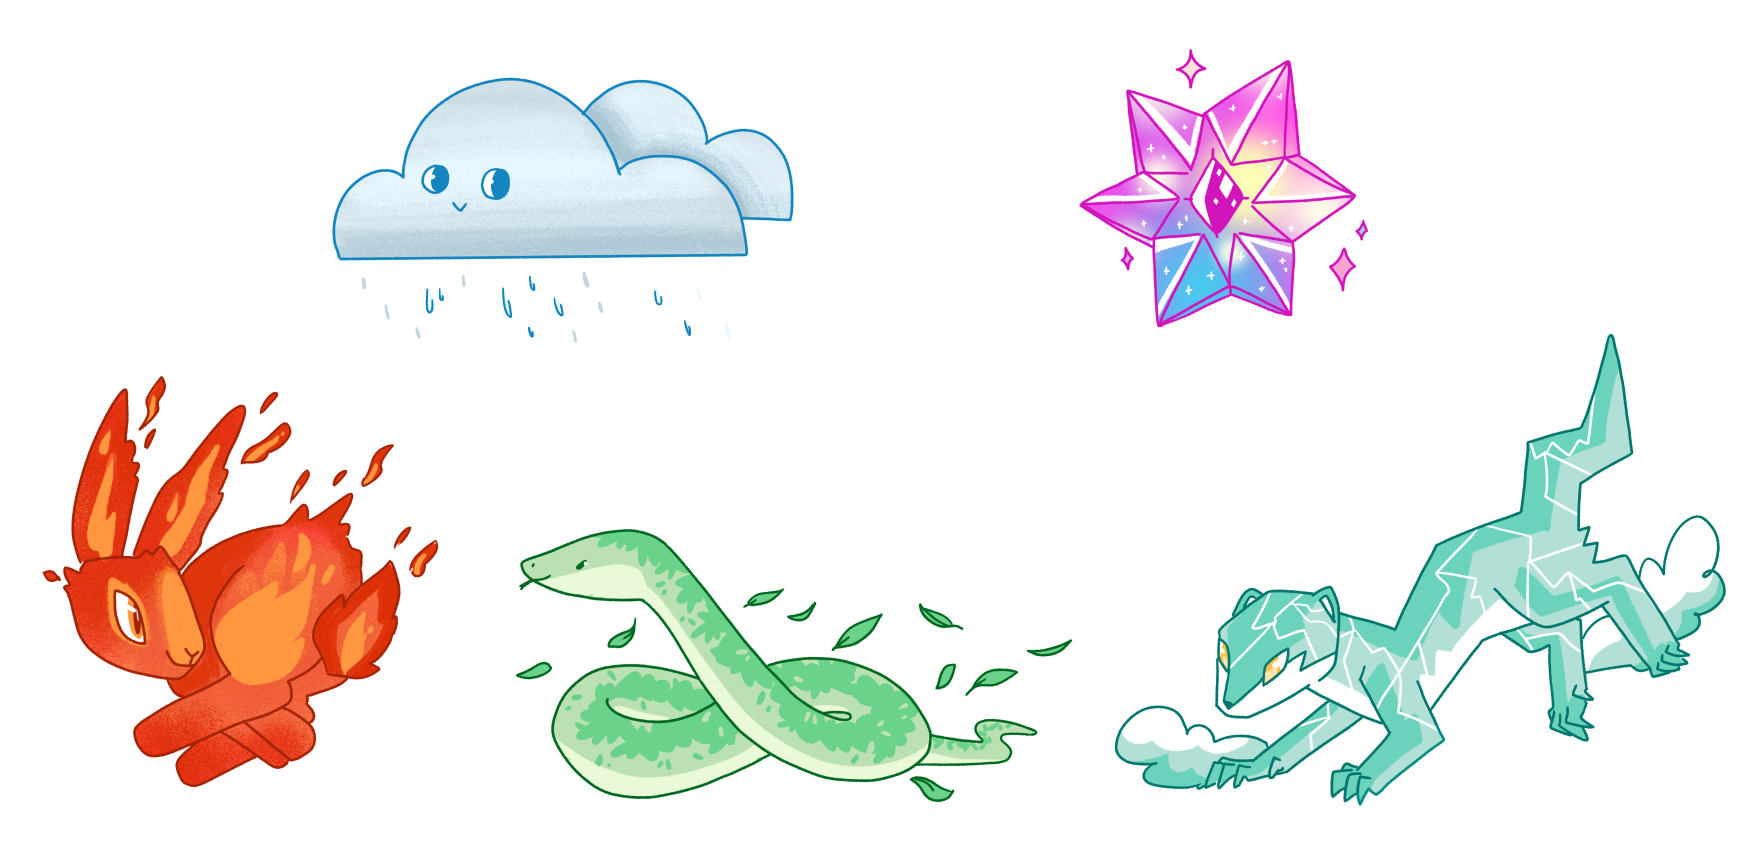 Examples of wisp companions such as a fire themed rabbit and an overgrowth themed snake.